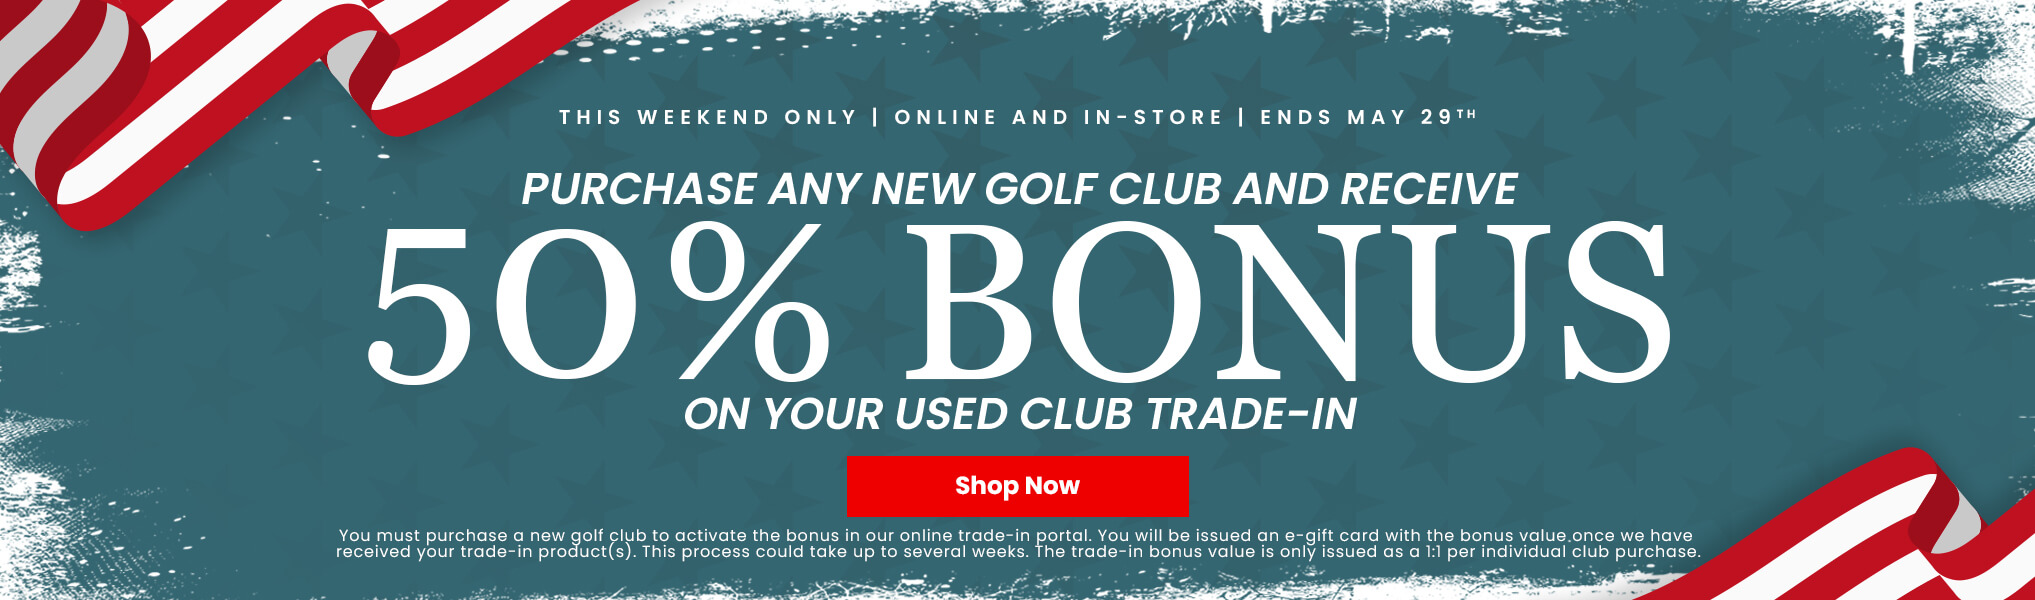 Now's the Time to Trade-In Your Clubs!